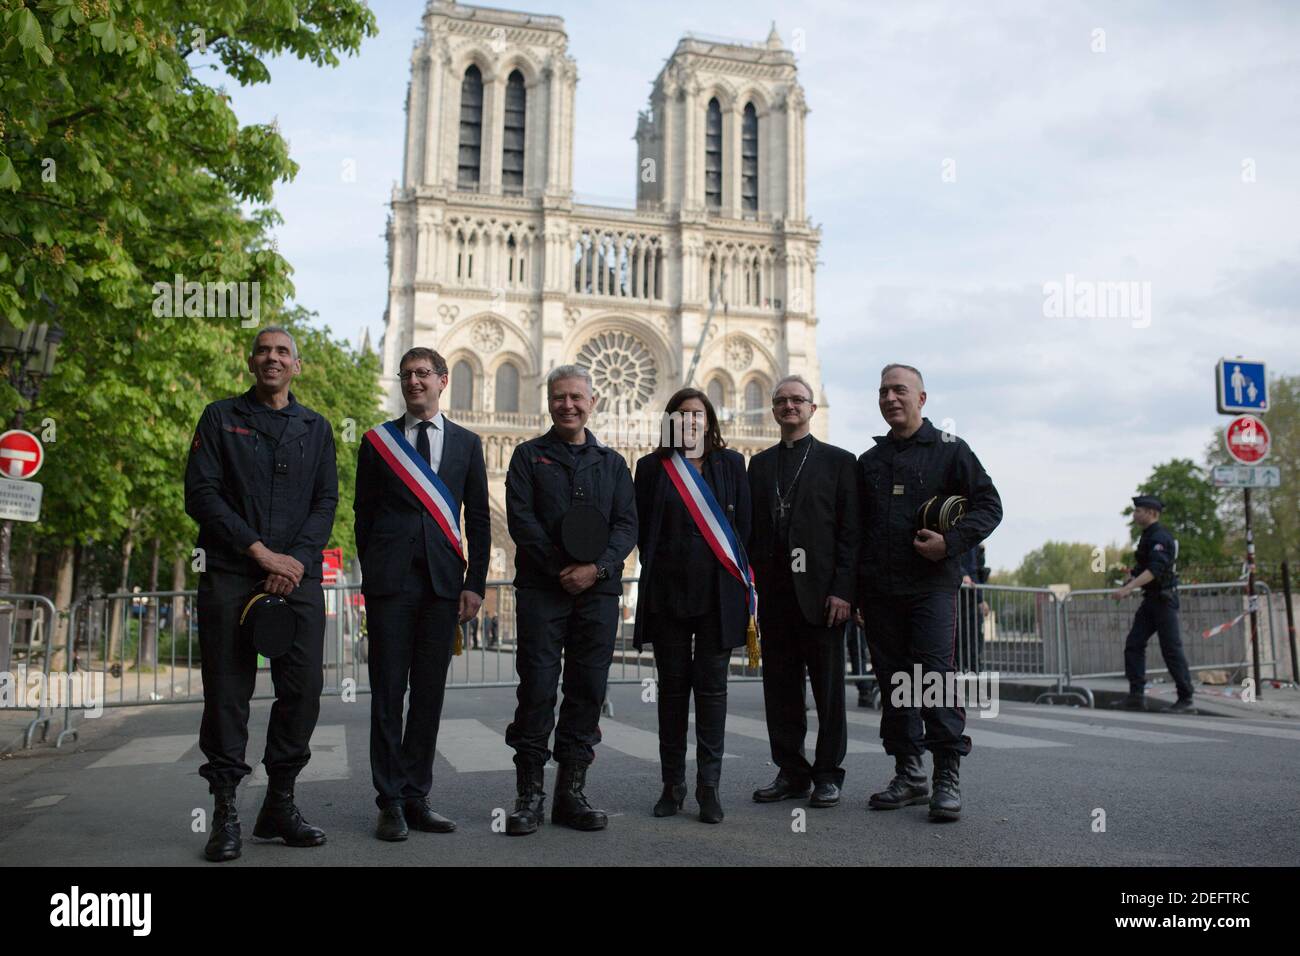 Anne Hidalgo and Firefighters poses for a picture in front of Notre Dame cathedral on April 18, 2019 in Paris. France paid a daylong tribute on April 18, 2019 to the Paris firefighters who saved Notre Dame Cathedral from collapse, while construction workers rushed to secure an area above one of the church's famed rose-shaped windows and other vulnerable sections of the fire-damaged landmark. Photo by Raphael Lafargue/ABACAPRESS.COM Stock Photo